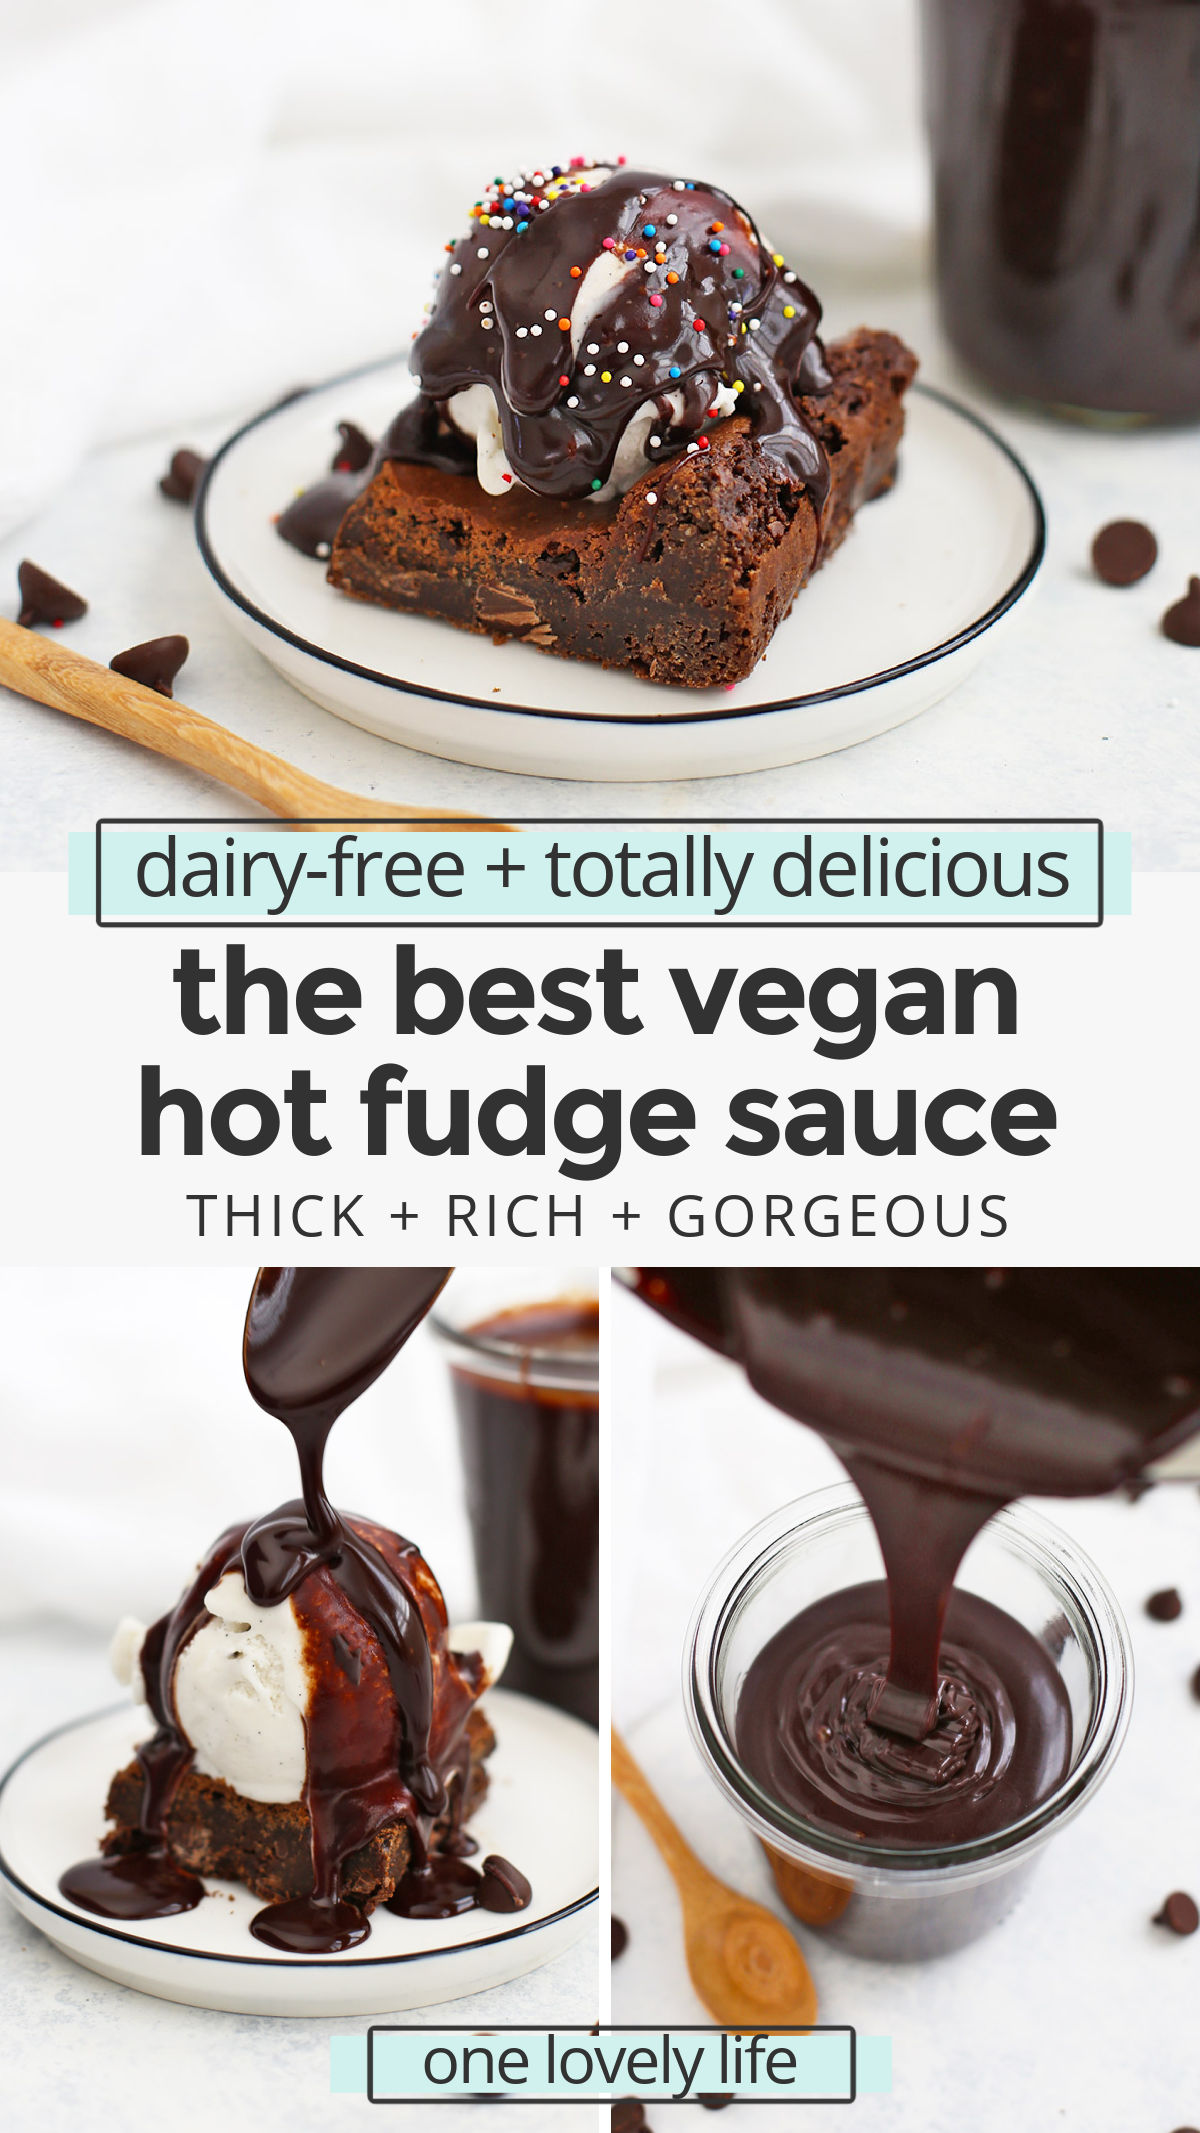 Vegan Hot Fudge Sauce - This dairy free chocolate sauce is perfect for ice cream sundaes and so much more! (gluten free, dairy free) // Dairy Free Hot Fudge Sauce // Healthy Hot Fudge Sauce // Chocolate Sauce // Ice Cream Toppings